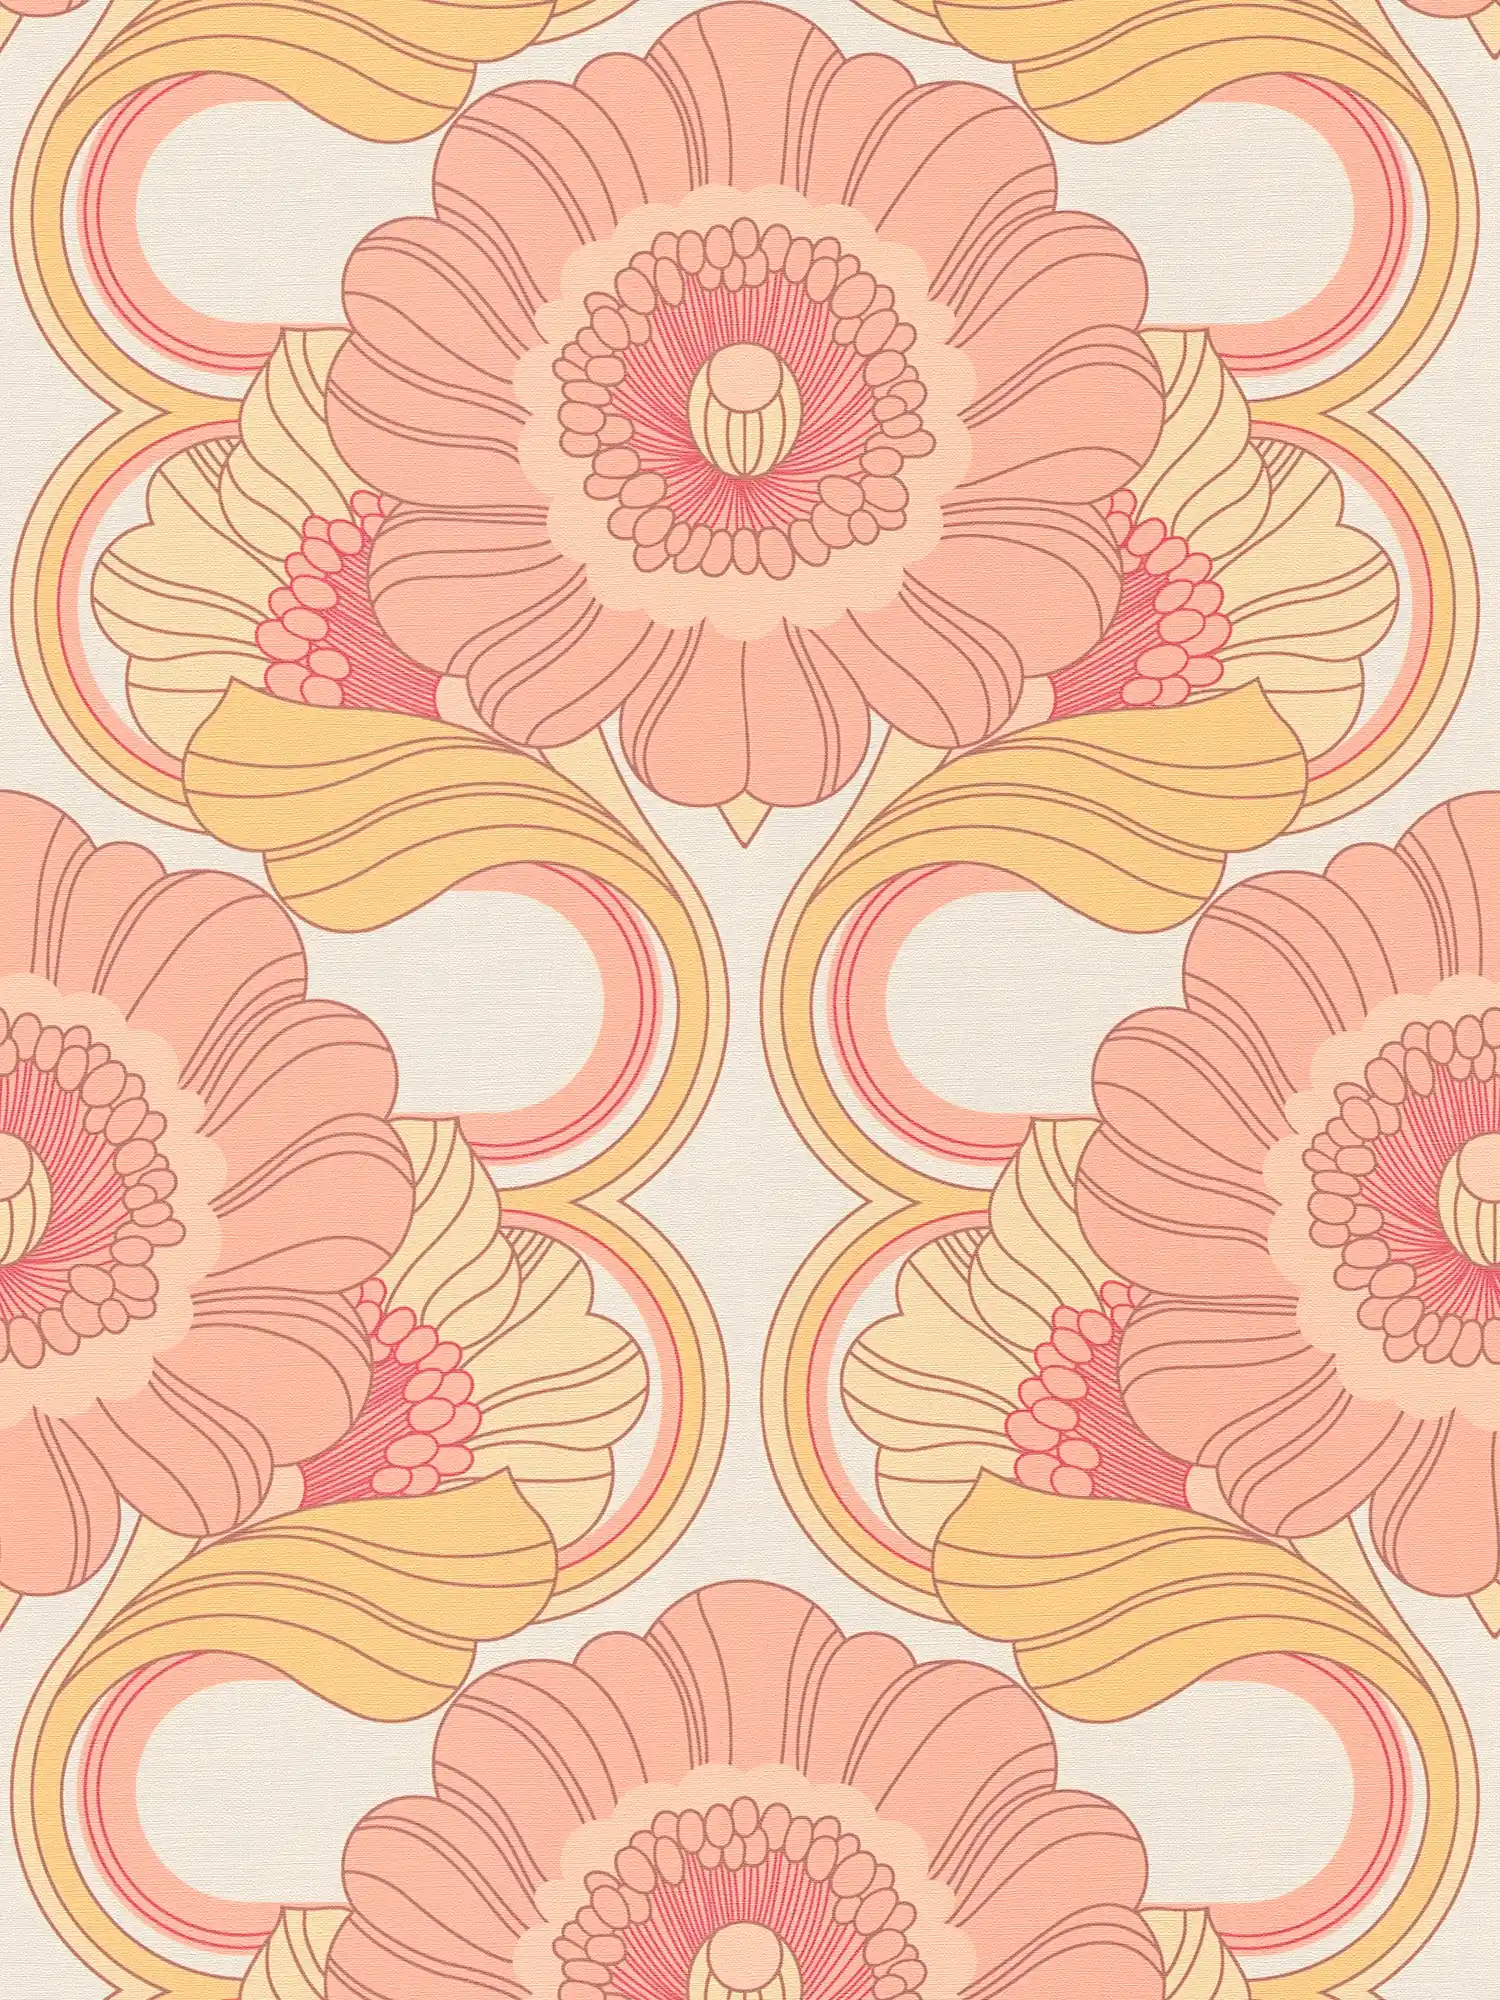 Floral retro wallpaper with light structure - yellow, pink, white
